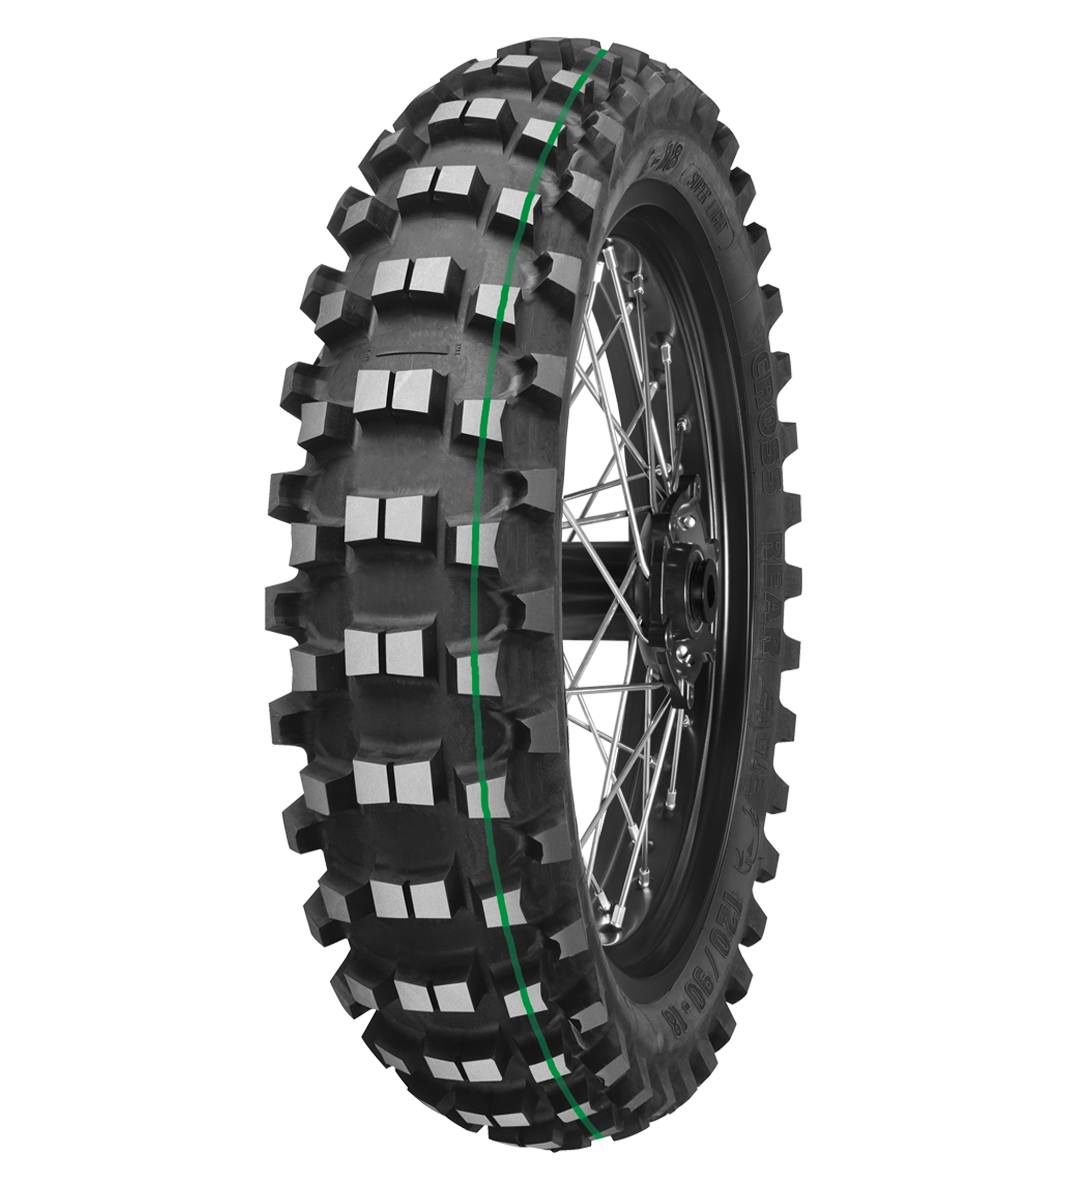 Mitas C-18 EAGLE 120/90-18 Enduro Competition Off-Road SUPER LIGHT 65R Green Tube Rear Tire, 226557, 120/90-18, C-18 Eagle, Enduro, Enduro Competition, Off-Road, Rear, Tires - Imported and distributed in North &amp; South America by Lindeco Genuine Powersports - Premier Powersports Equipment and Accessories for Motorcycle Enthusiasts, Professional Riders and Dealers.